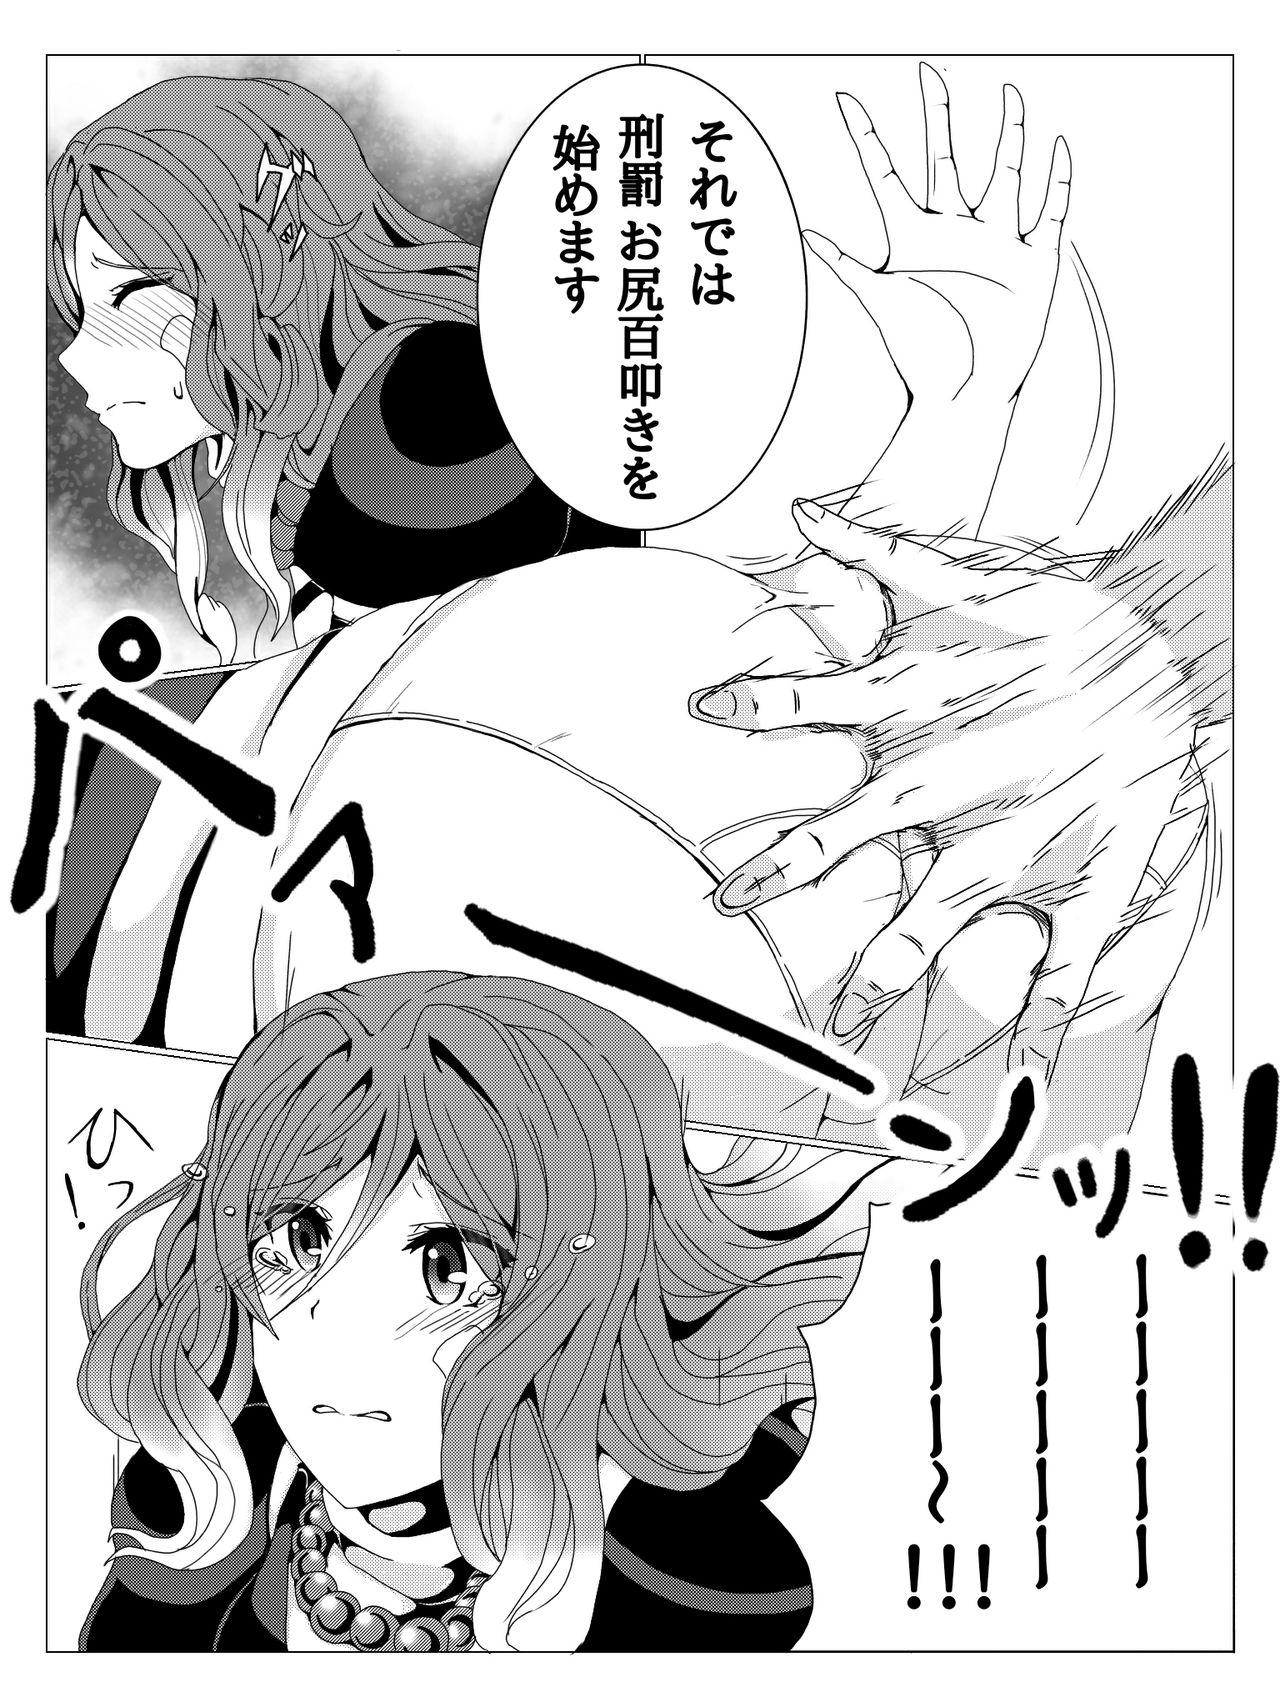 Blowjobs 聖白蓮の秘密事情 - Touhou project Gay Shorthair - Page 5